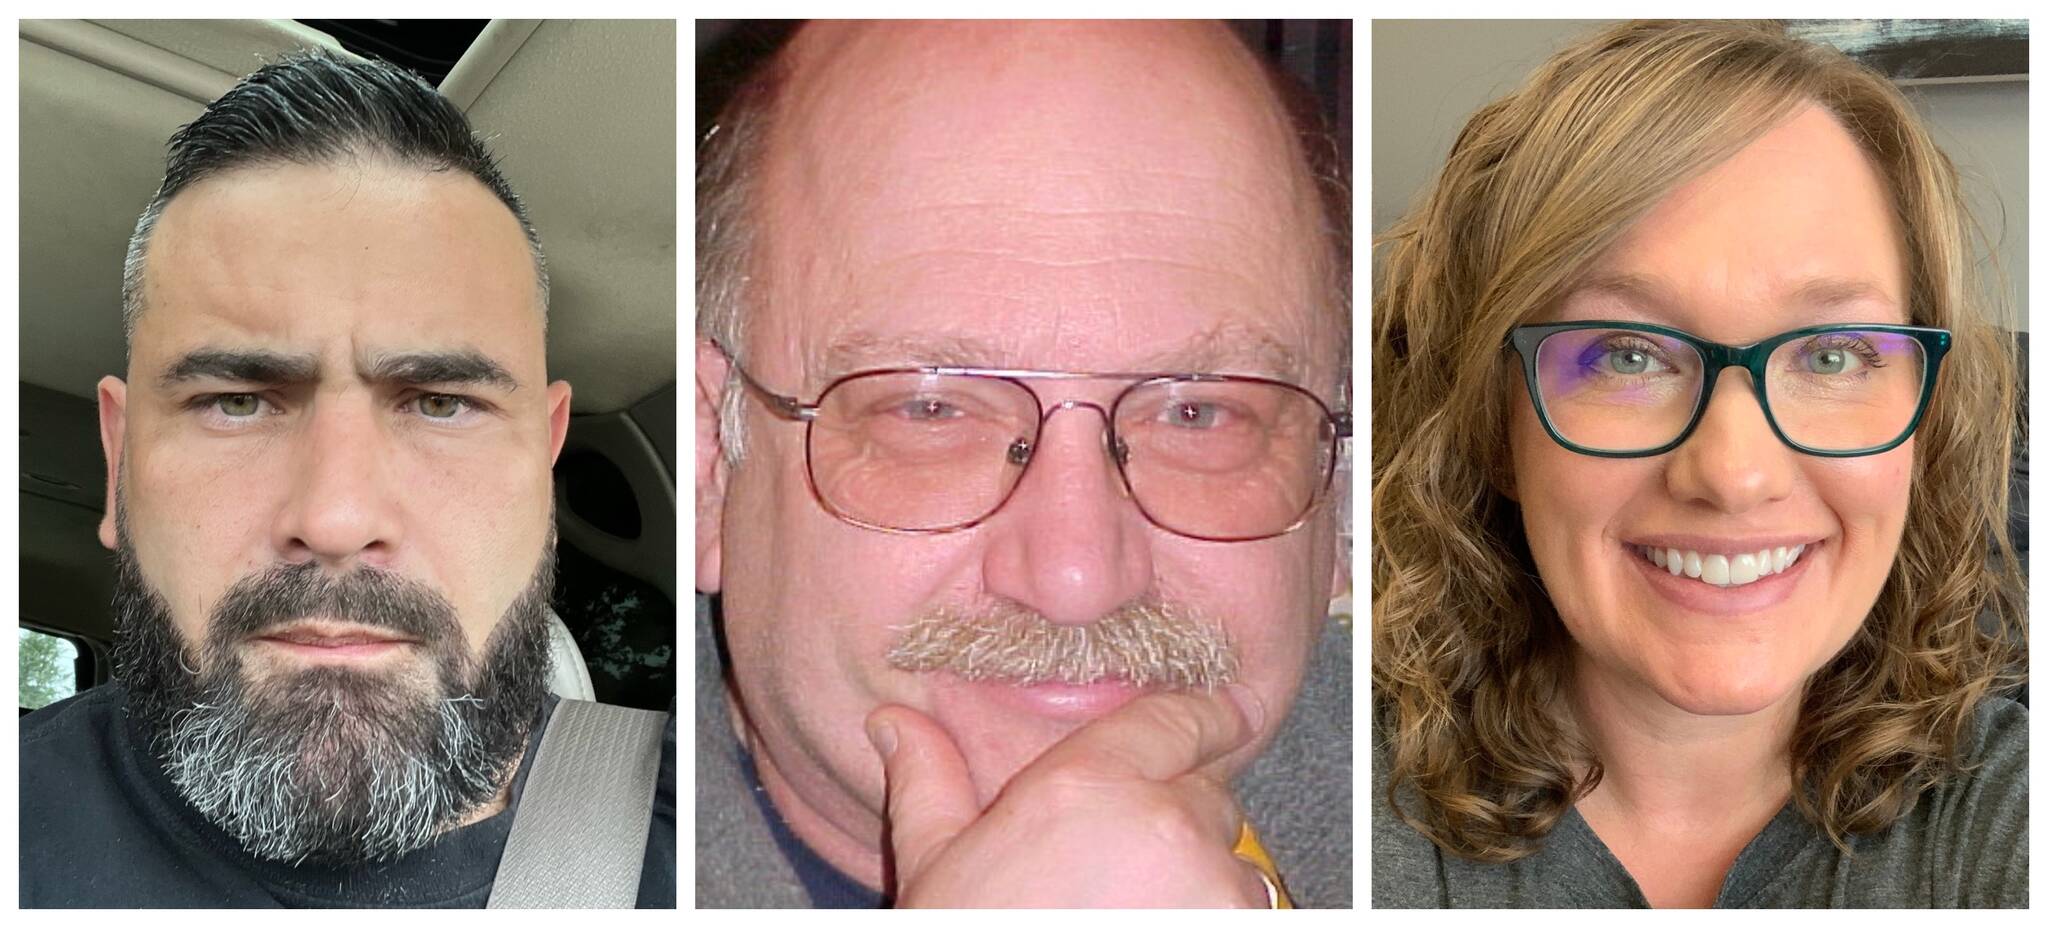 Primary election candidates for North Beach School Board District 4, from left: Joe Lomedico, Halvar Olstead and Jessica Iliff.